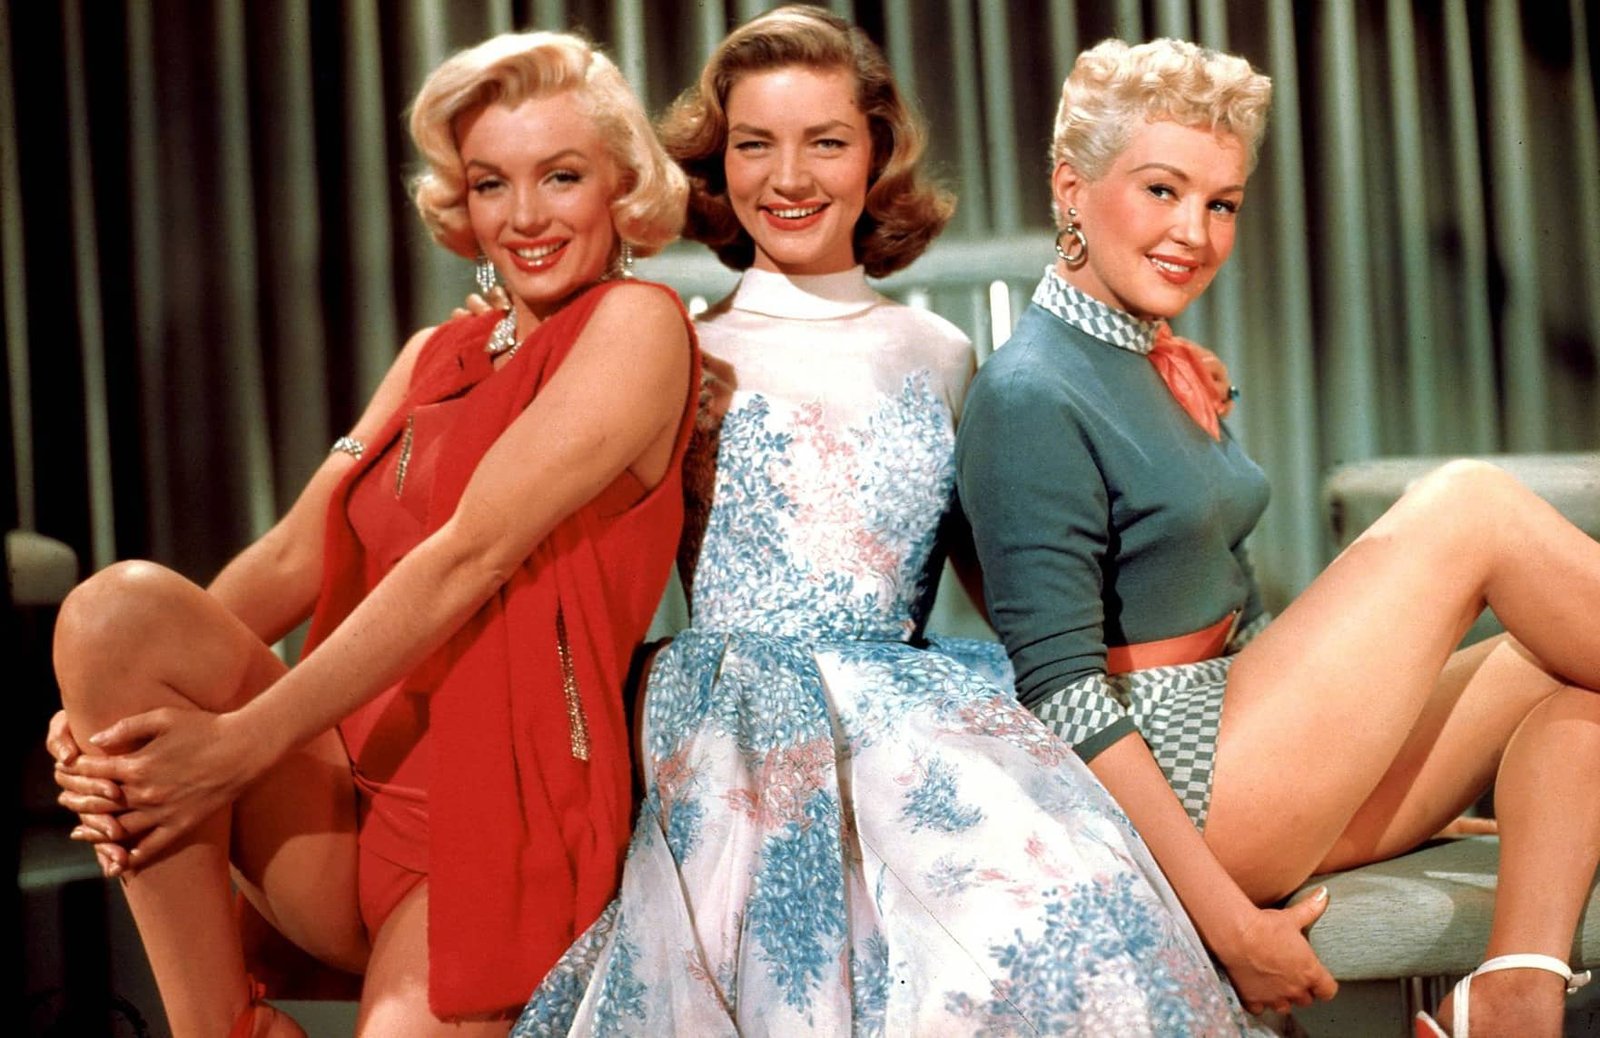 Best Marilyn Monroe Movies Ranked - How to Marry a Millionaire